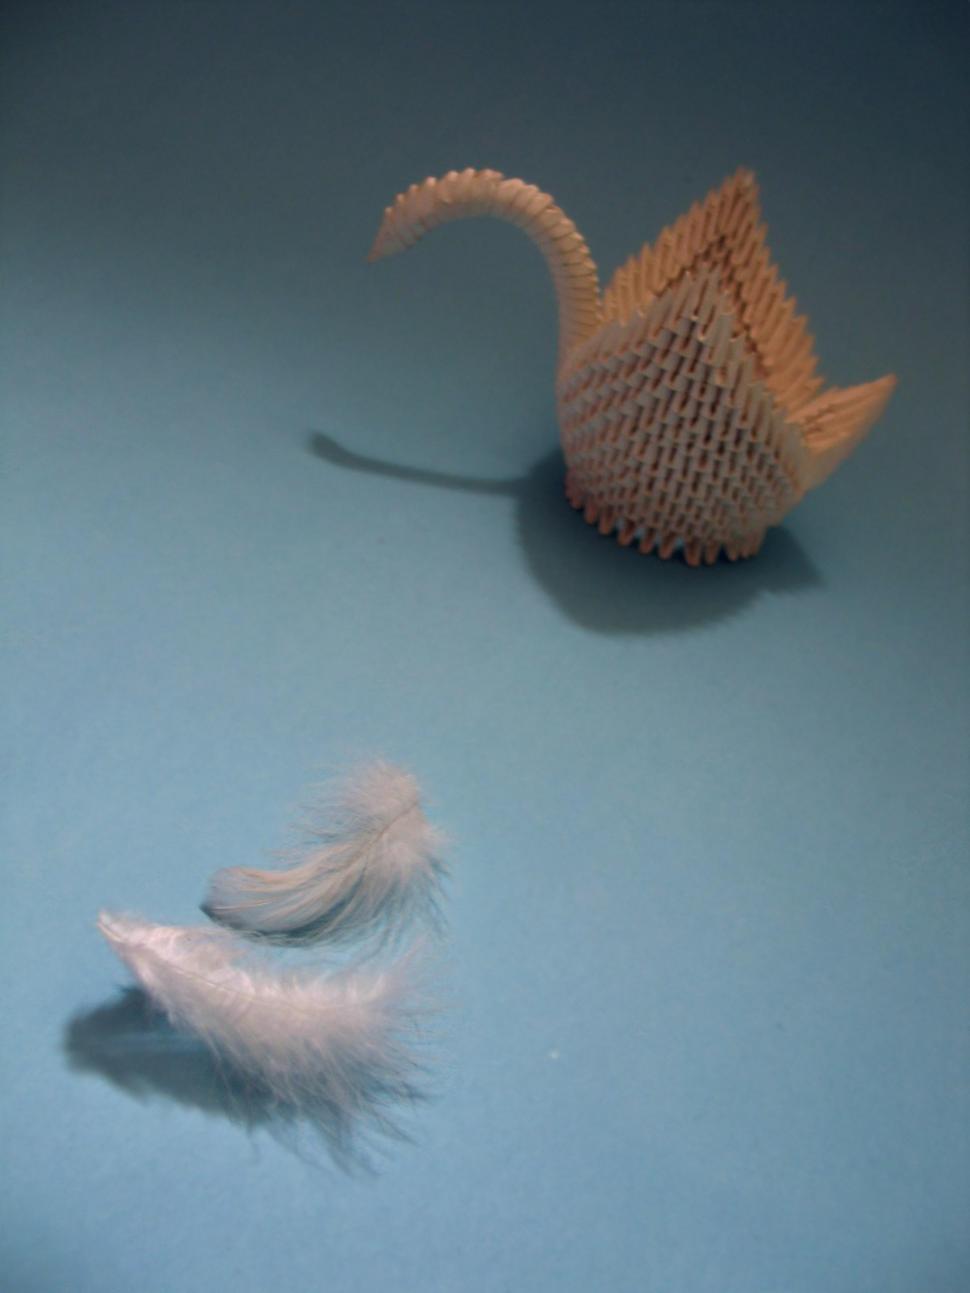 Free Image of Swan and Feathers 